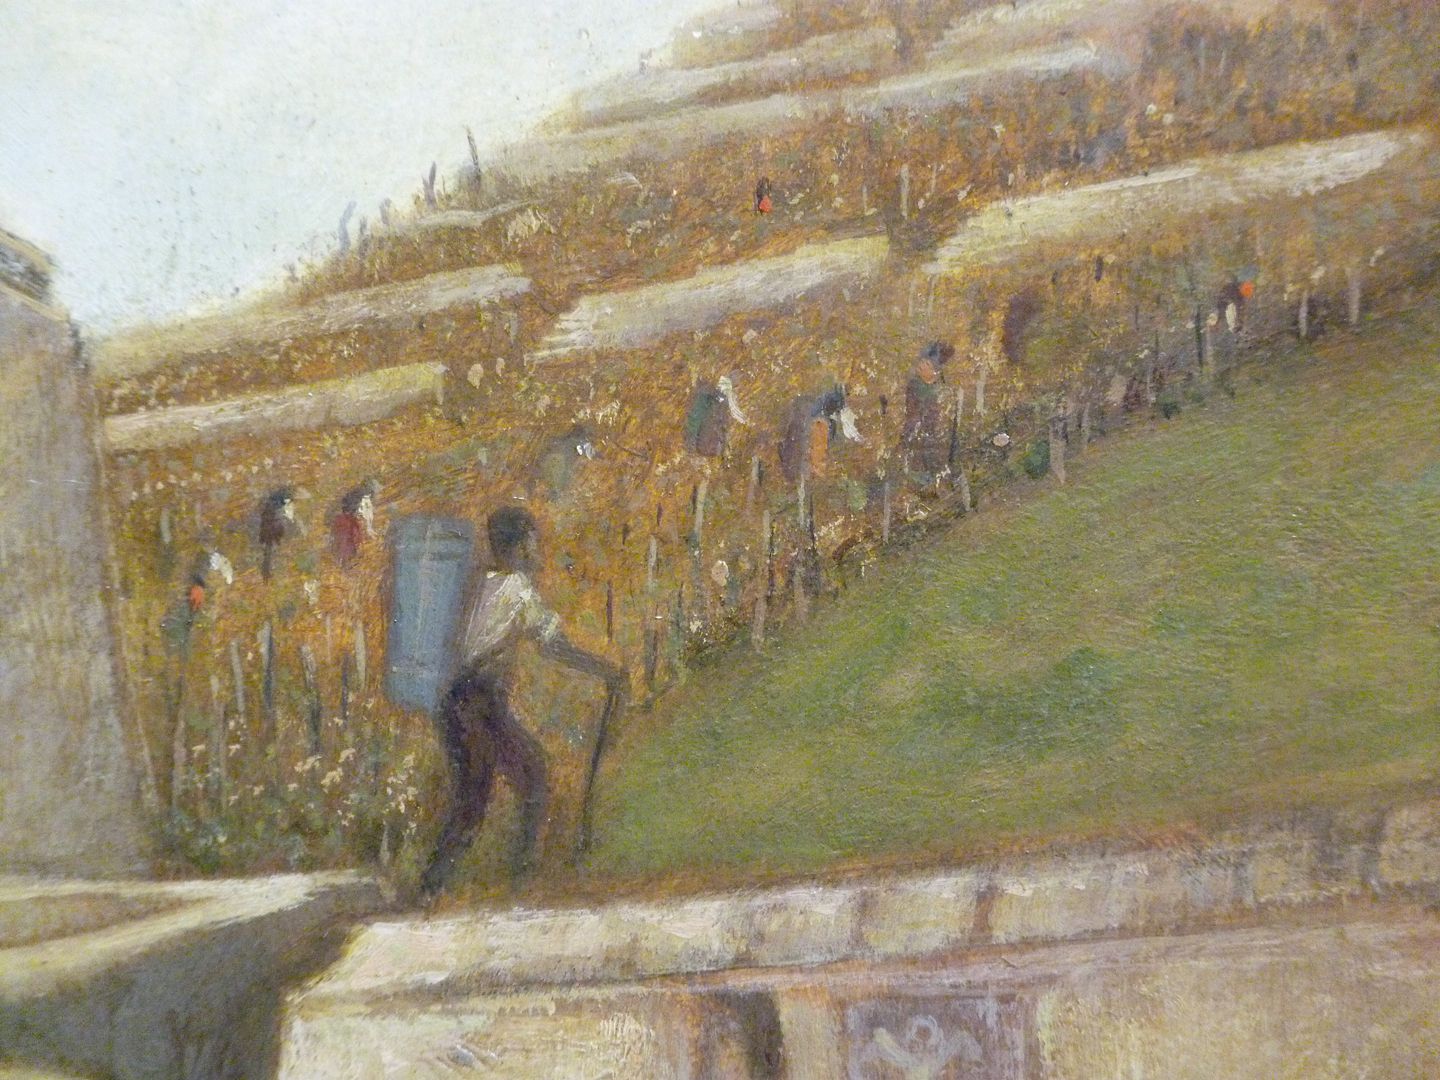 Grape harvest near Würzburg Image detail, upper right half of the image, grape harvest on the mountain